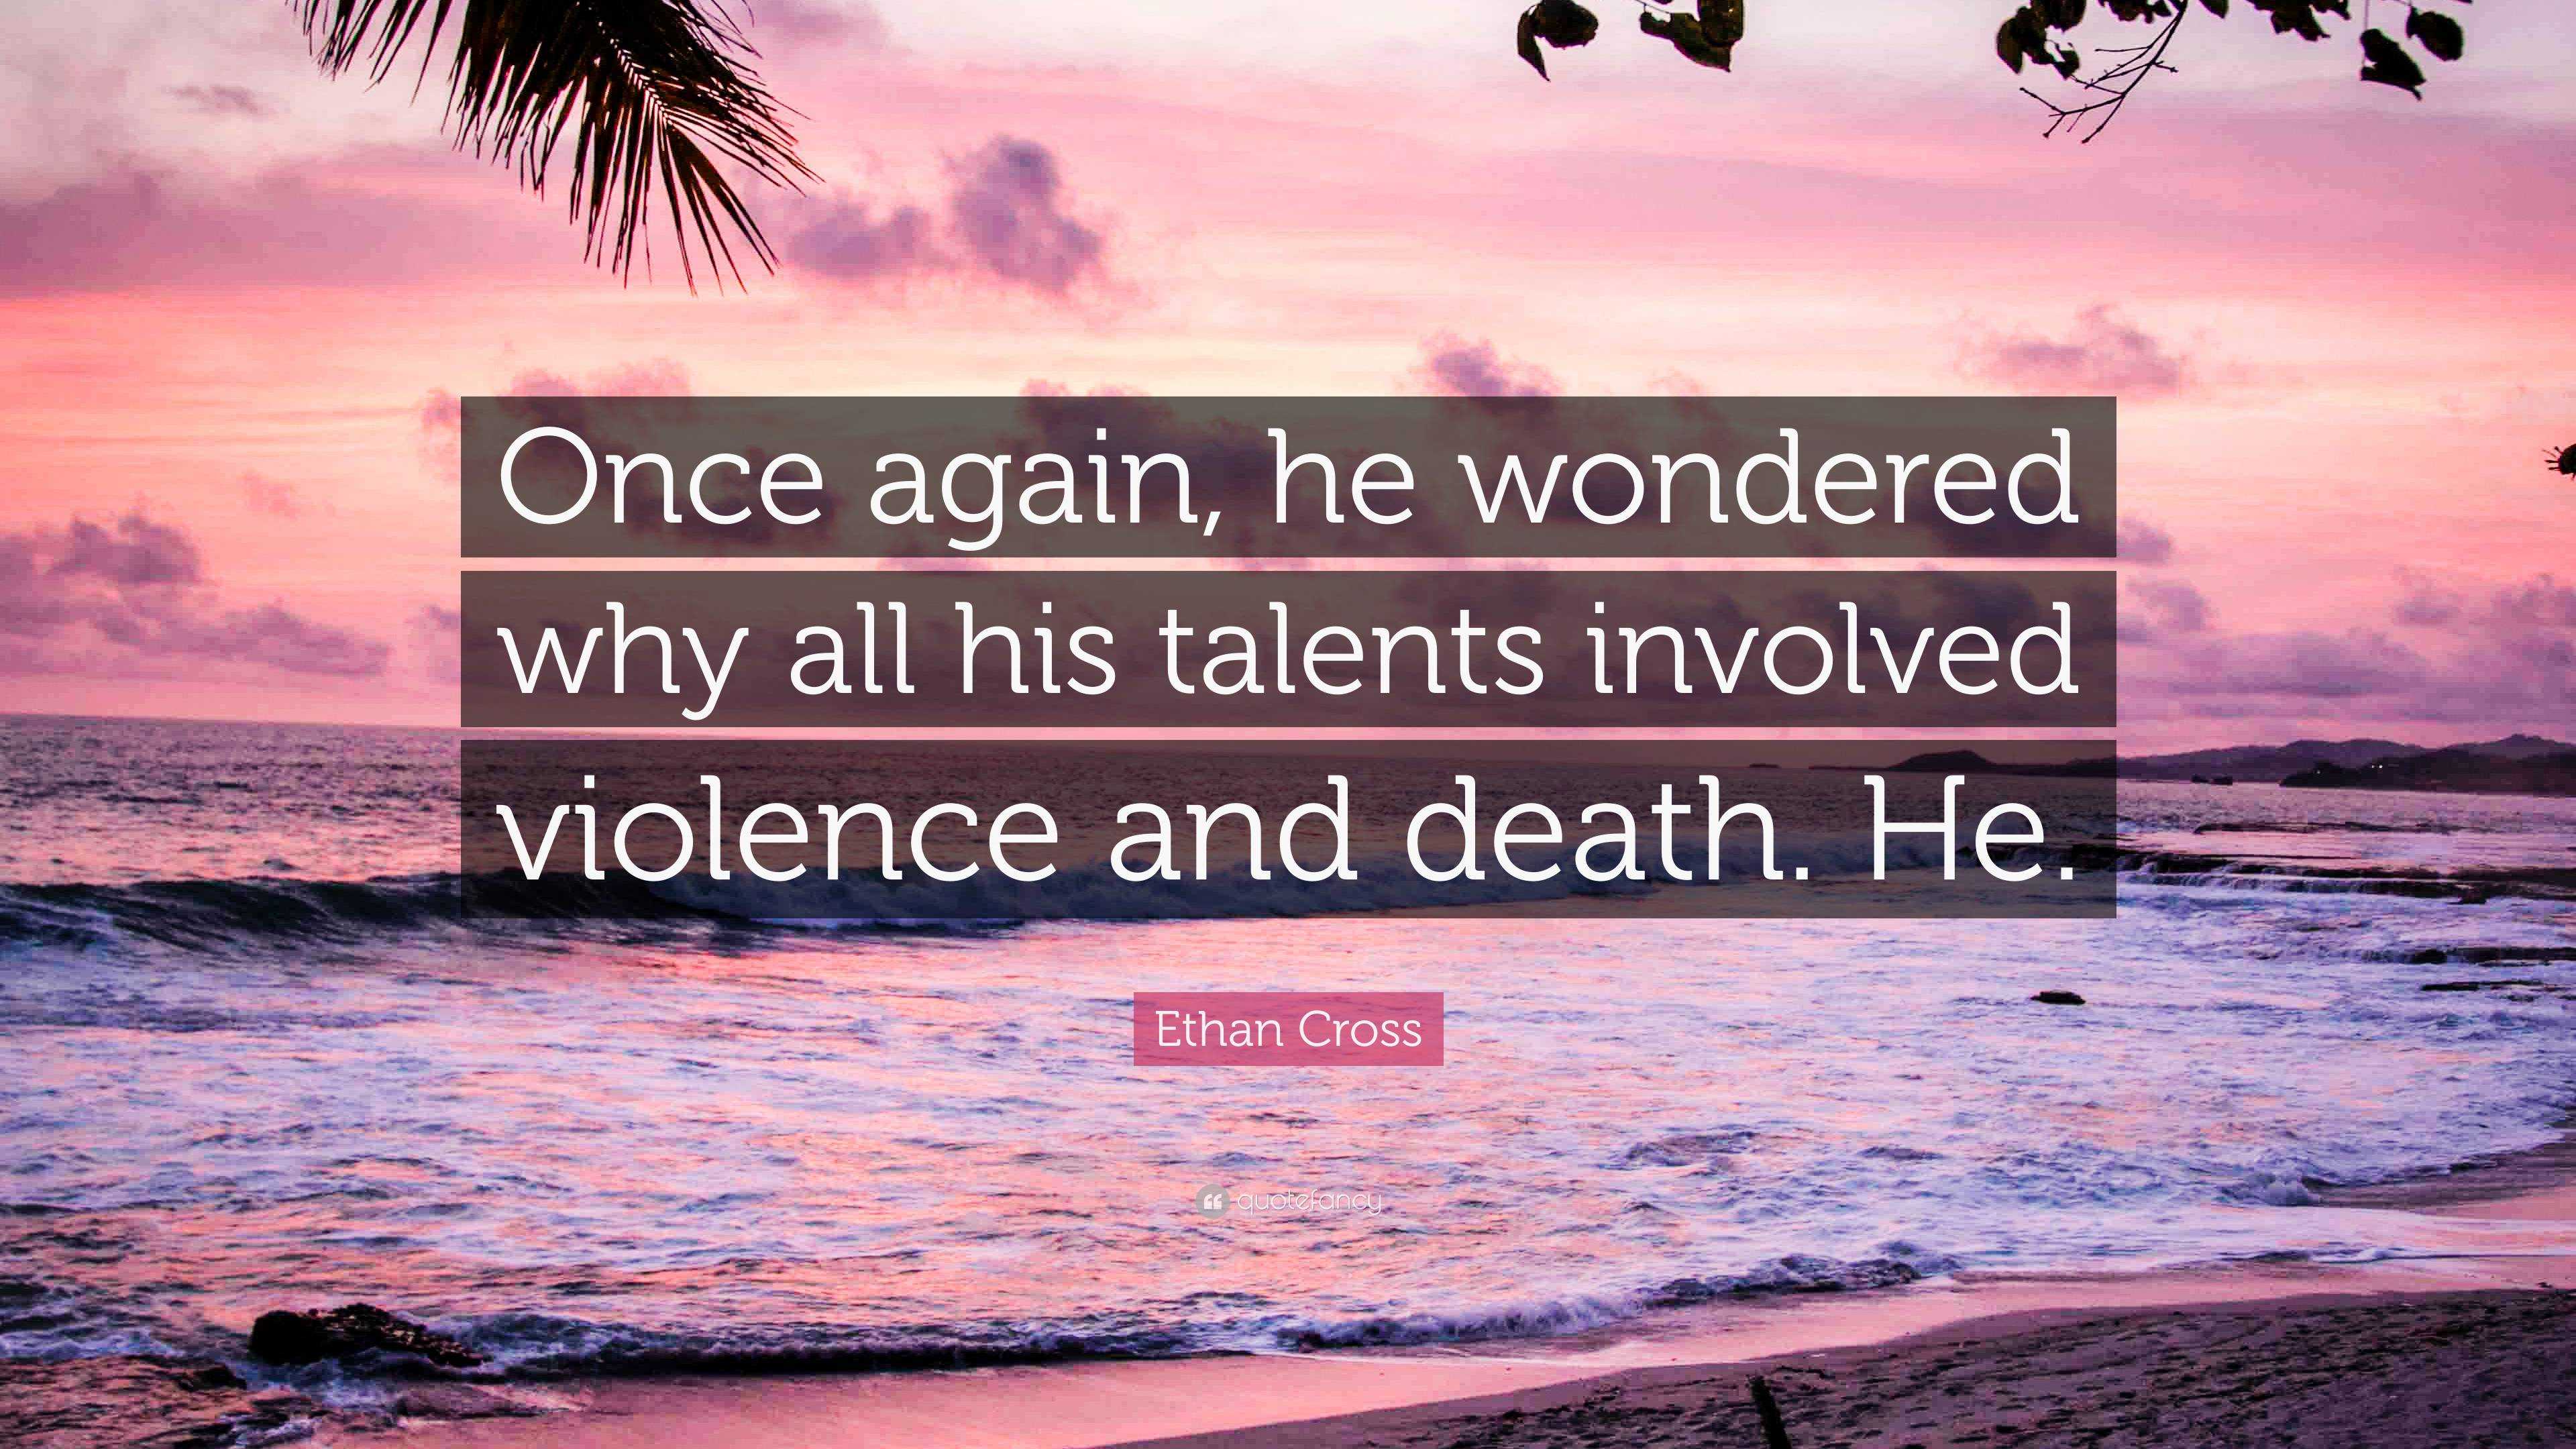 Ethan Cross Quote: “Once again, he wondered why all his talents ...